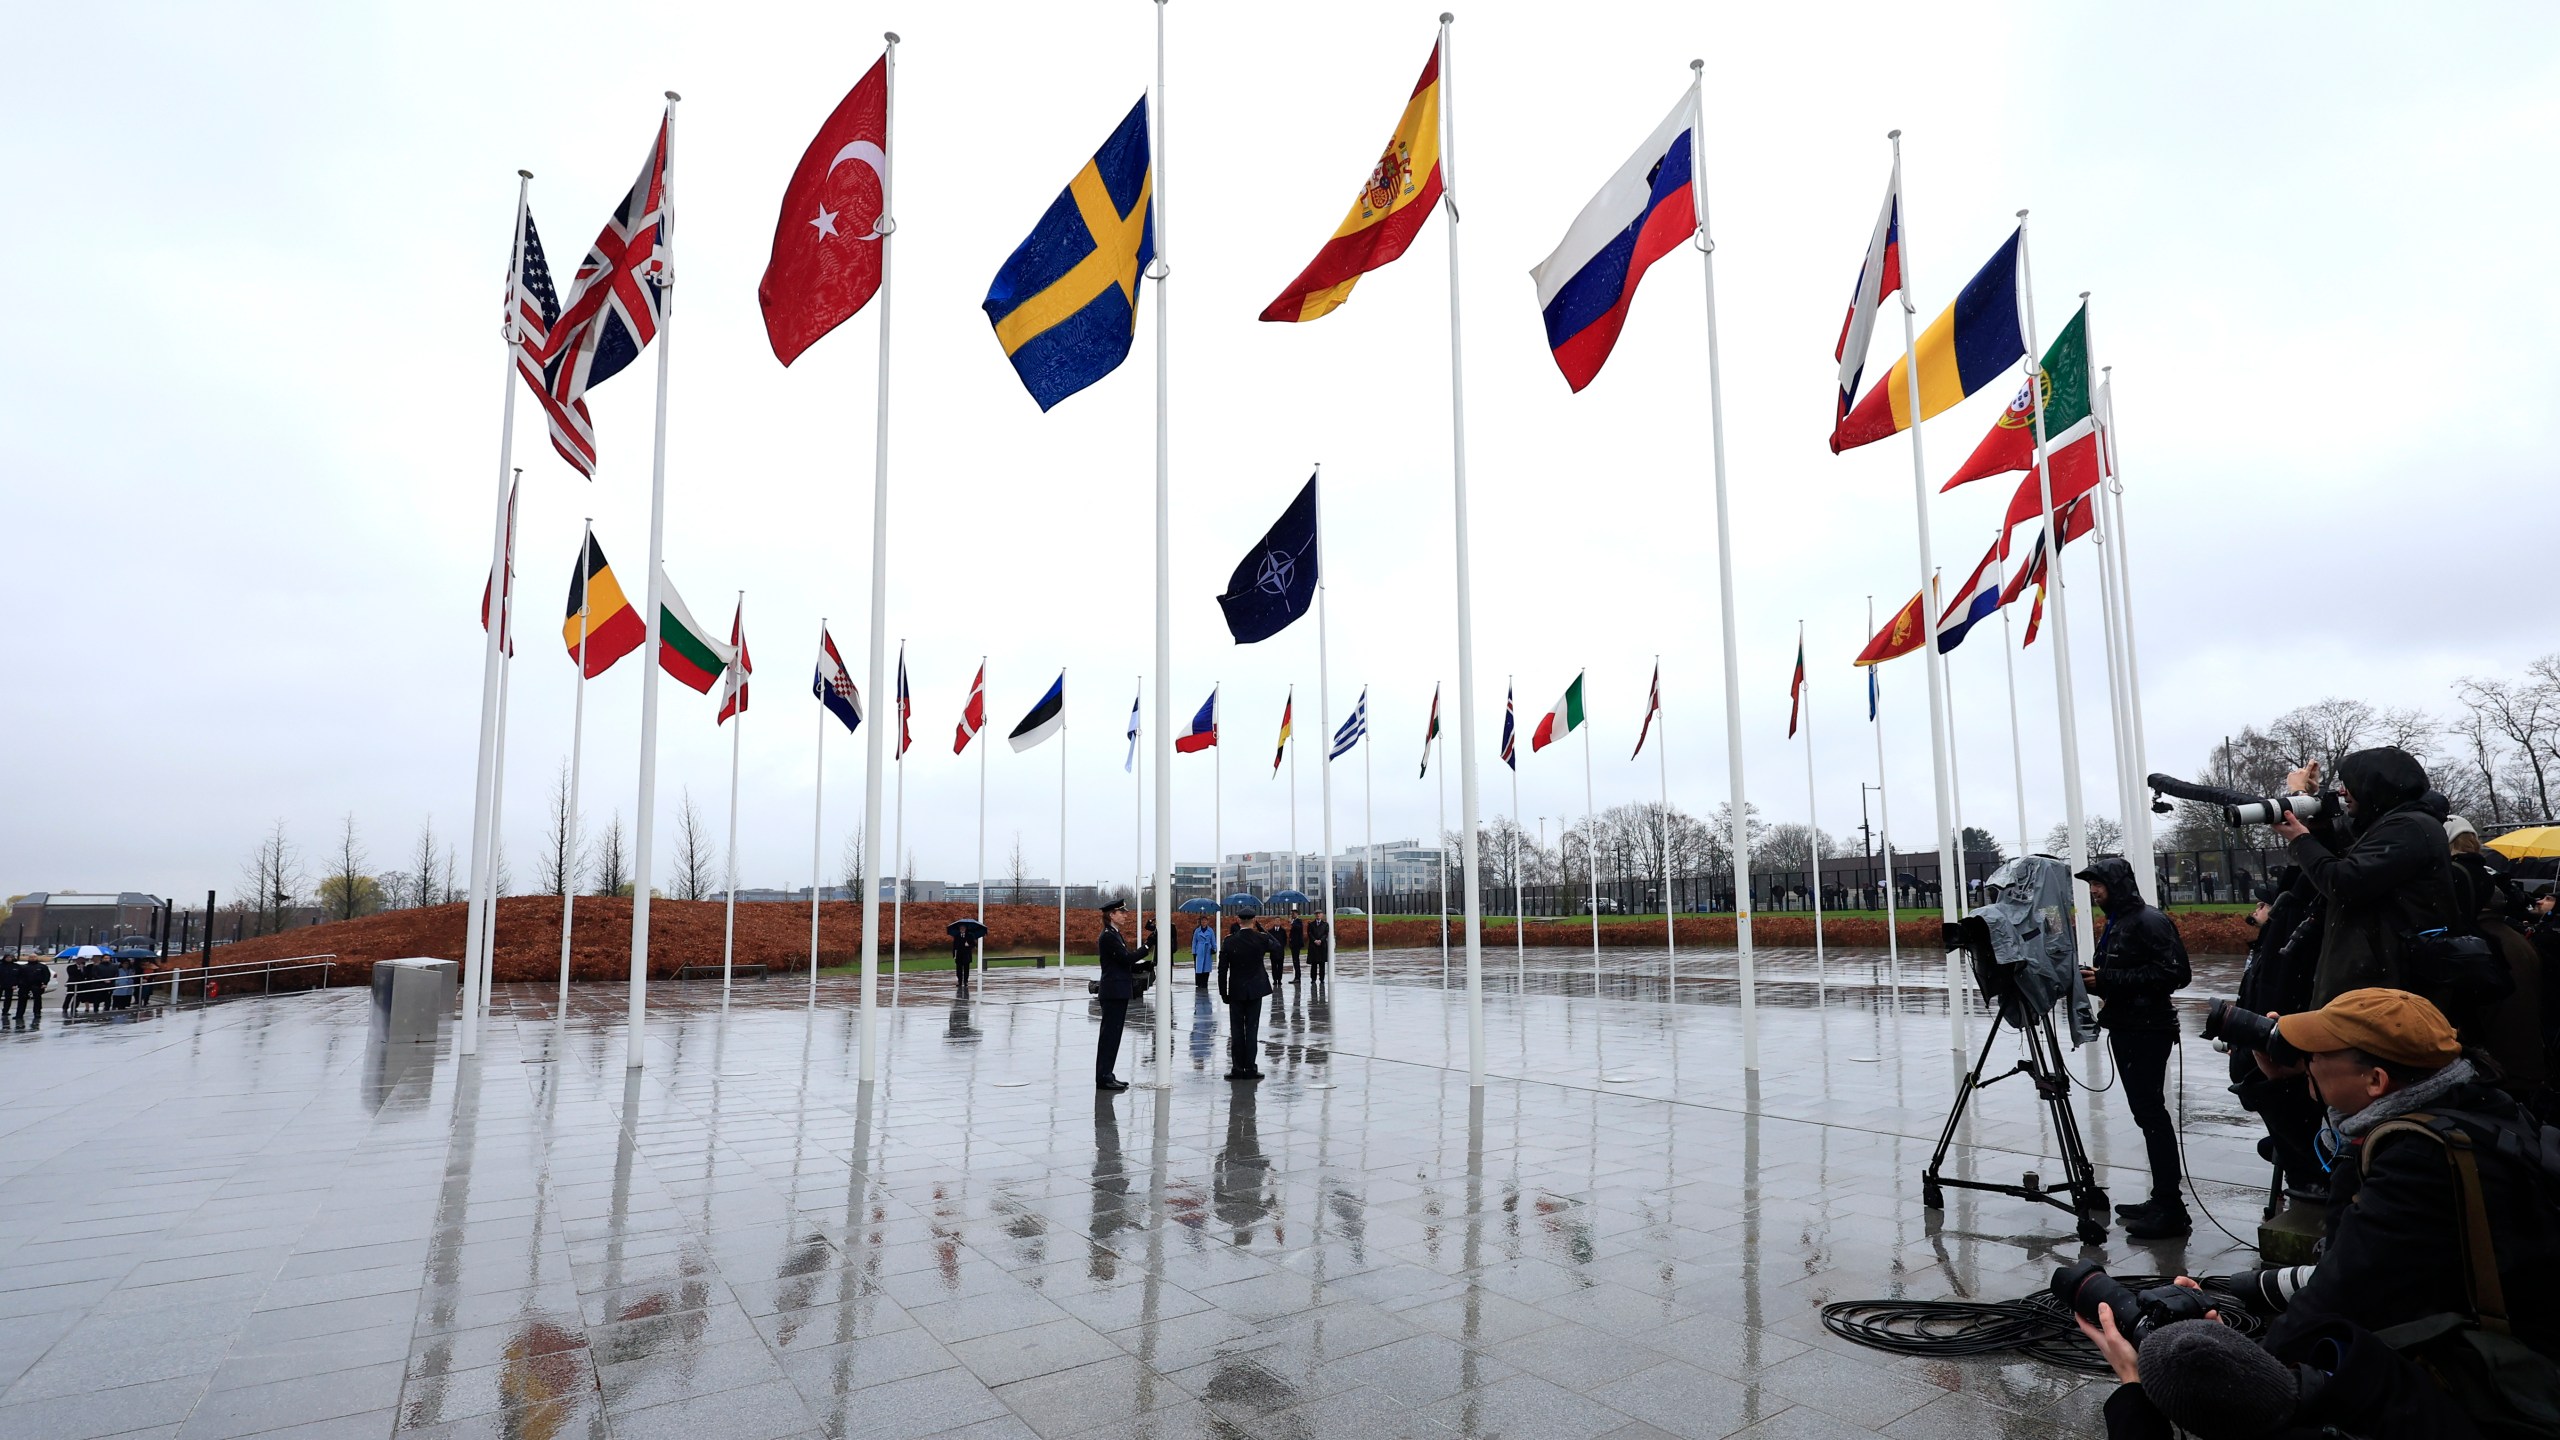 Members of the military raise the flag of Sweden on its newly installed pole during a ceremony to mark the accession of Sweden to NATO at NATO headquarters in Brussels, Monday, March 11, 2024. (AP Photo/Geert Vanden Wijngaert)